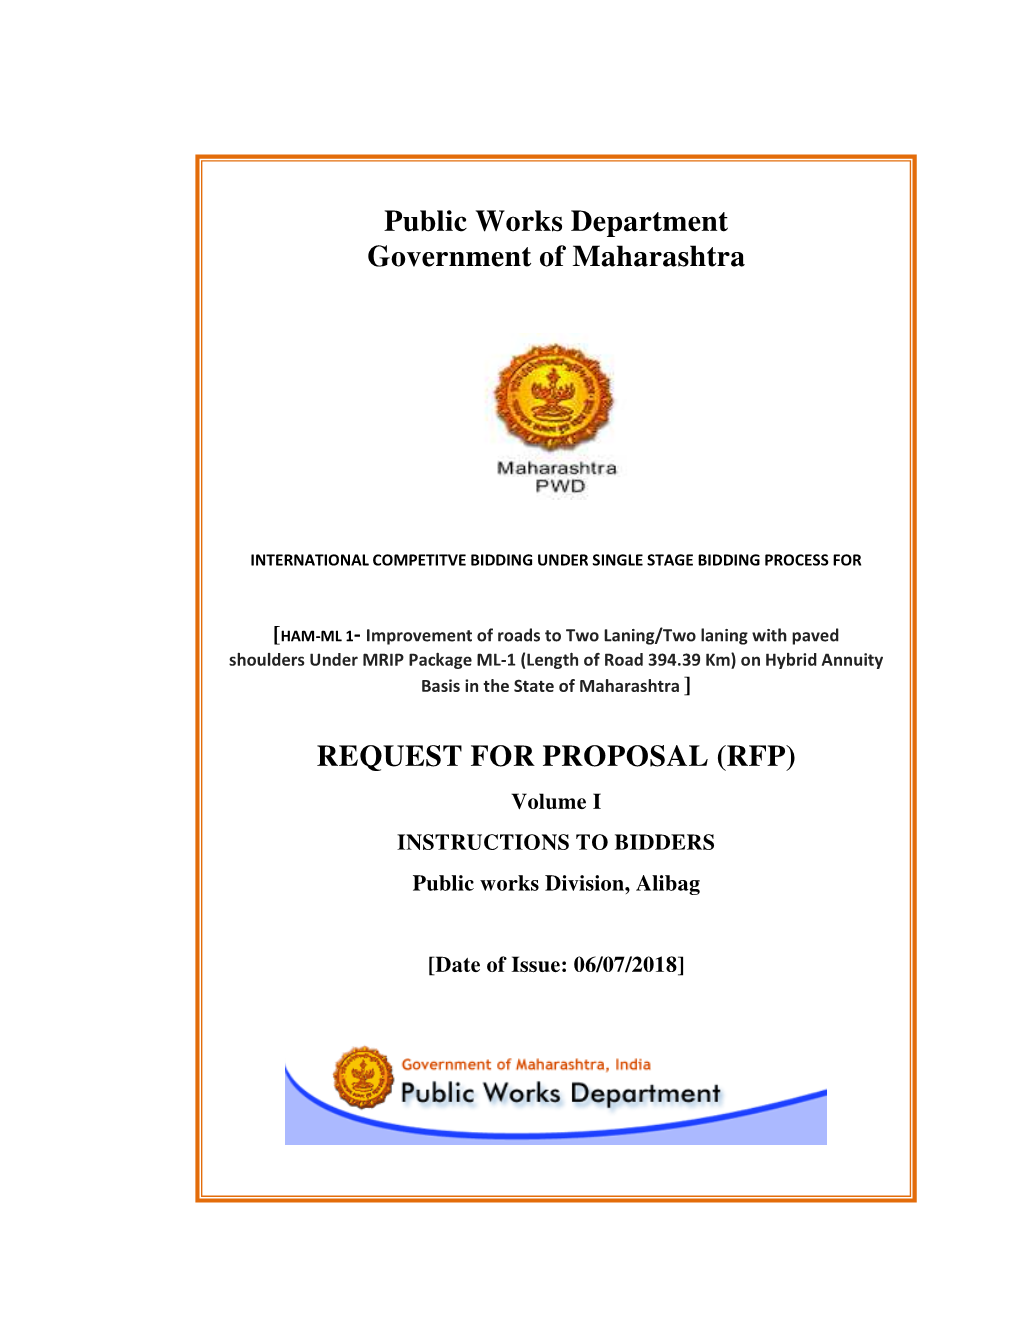 Public Works Department Government of Maharashtra